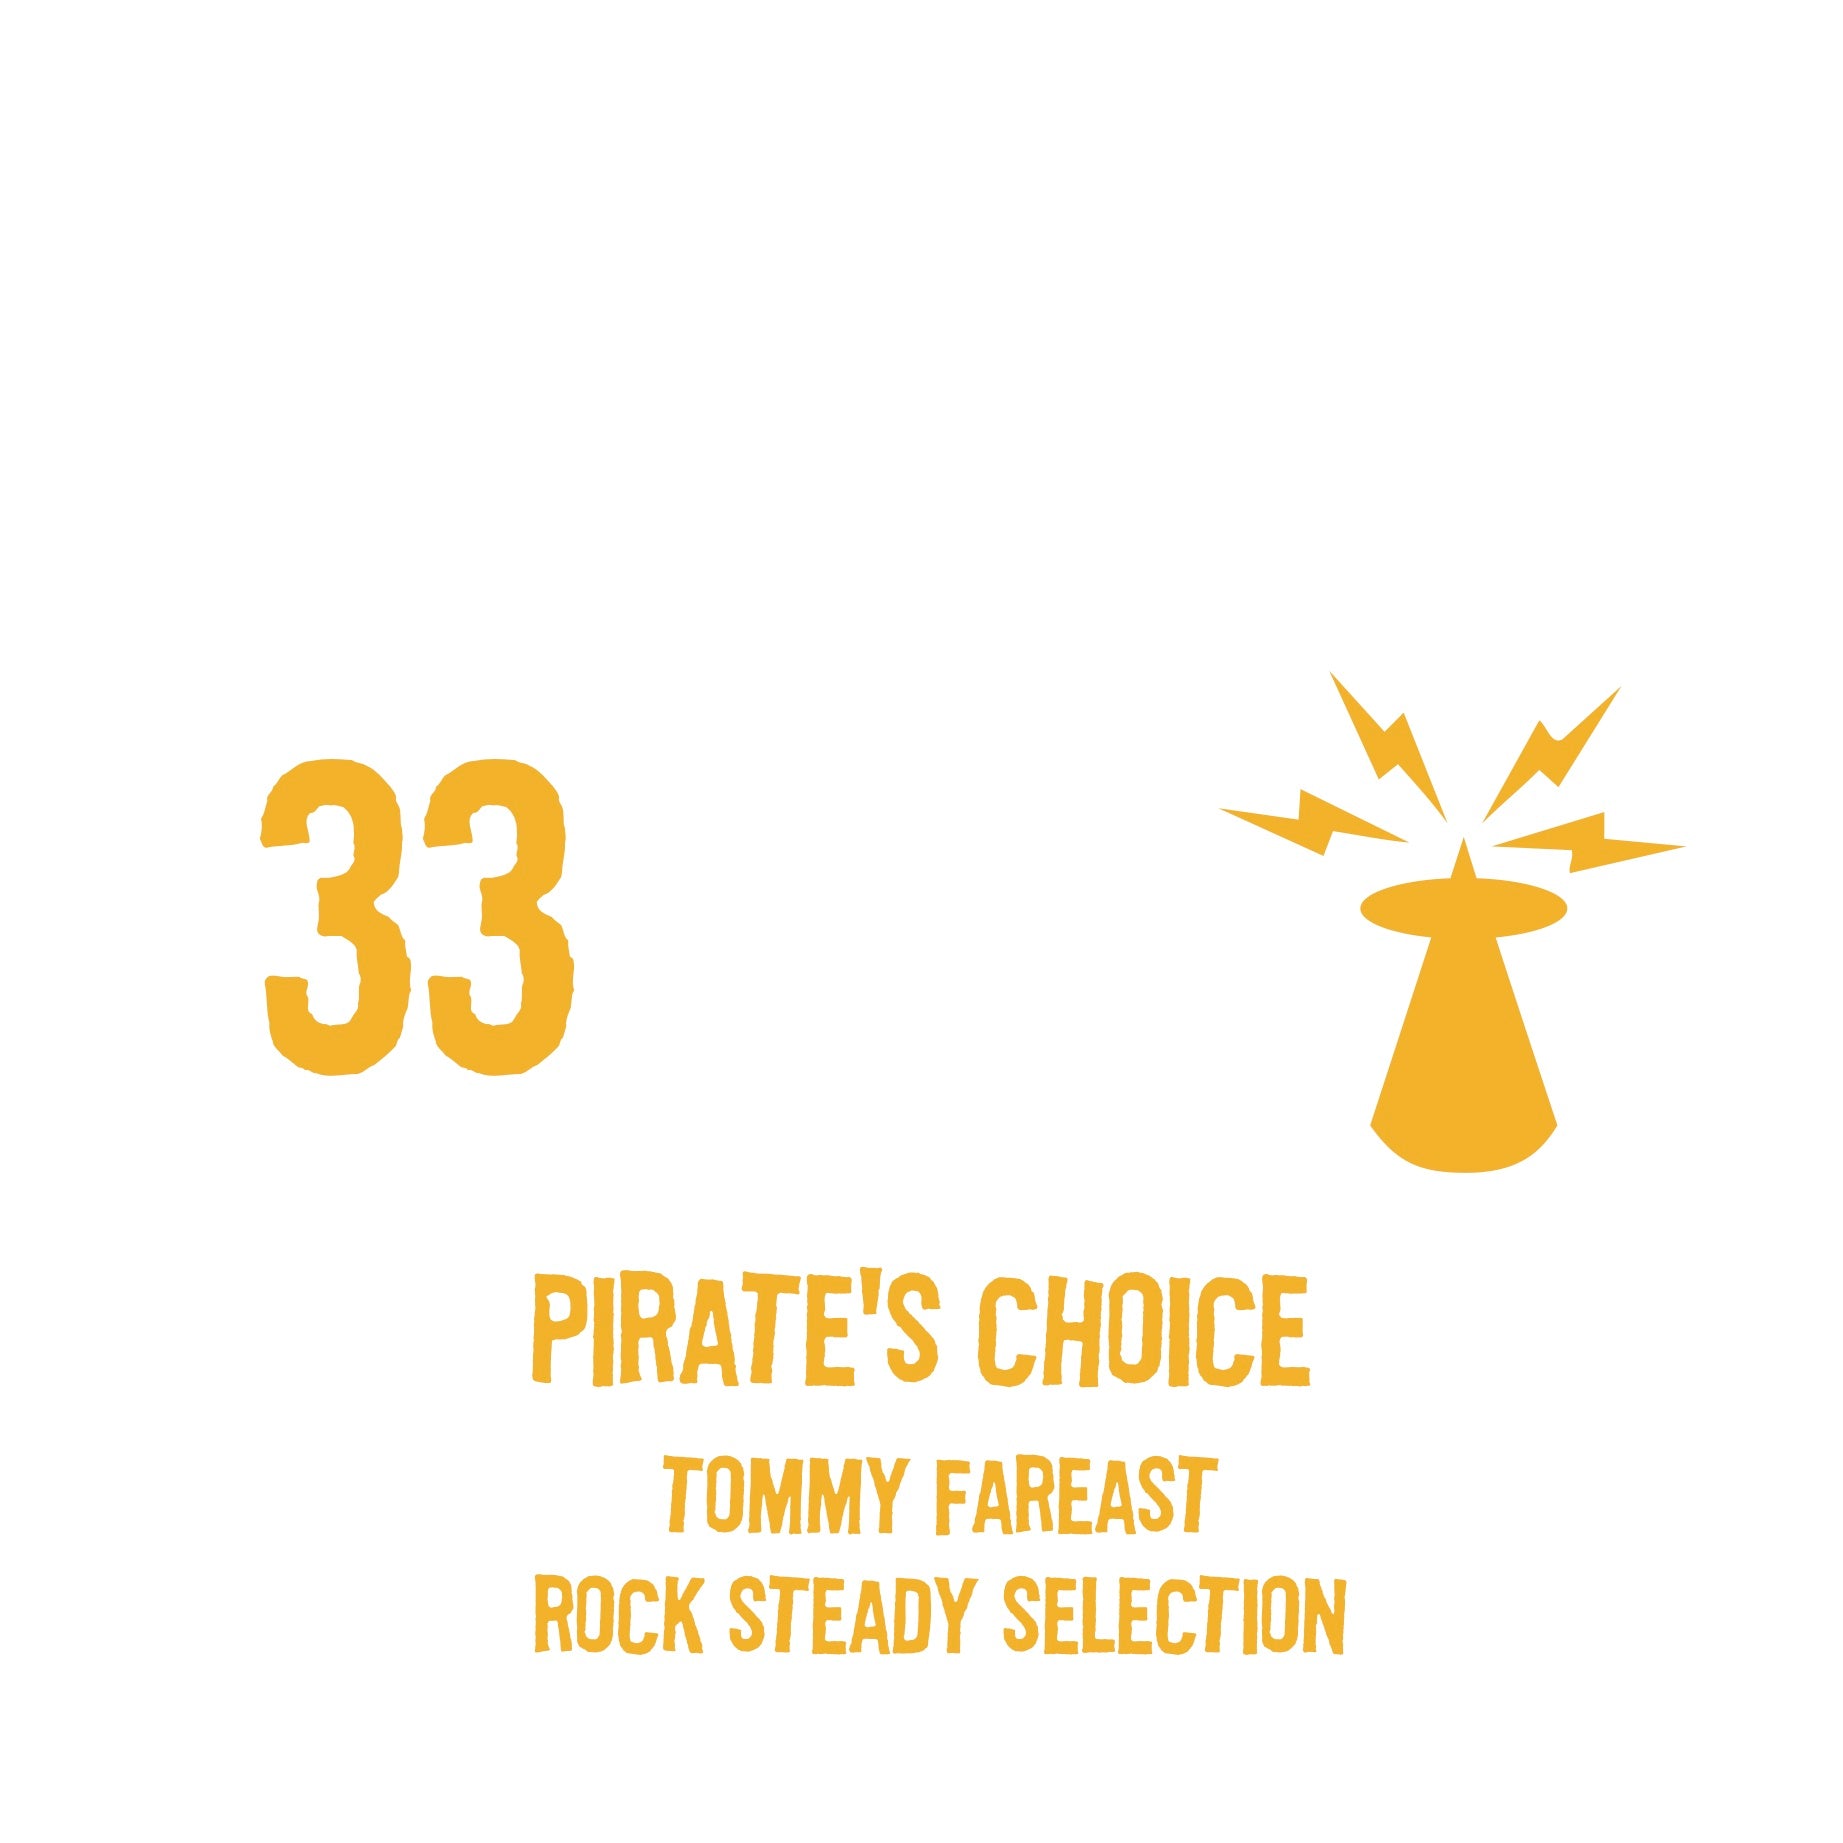 PIRATES CHOICE [Pt33 Tommy Fareast Rock Steady Selection]